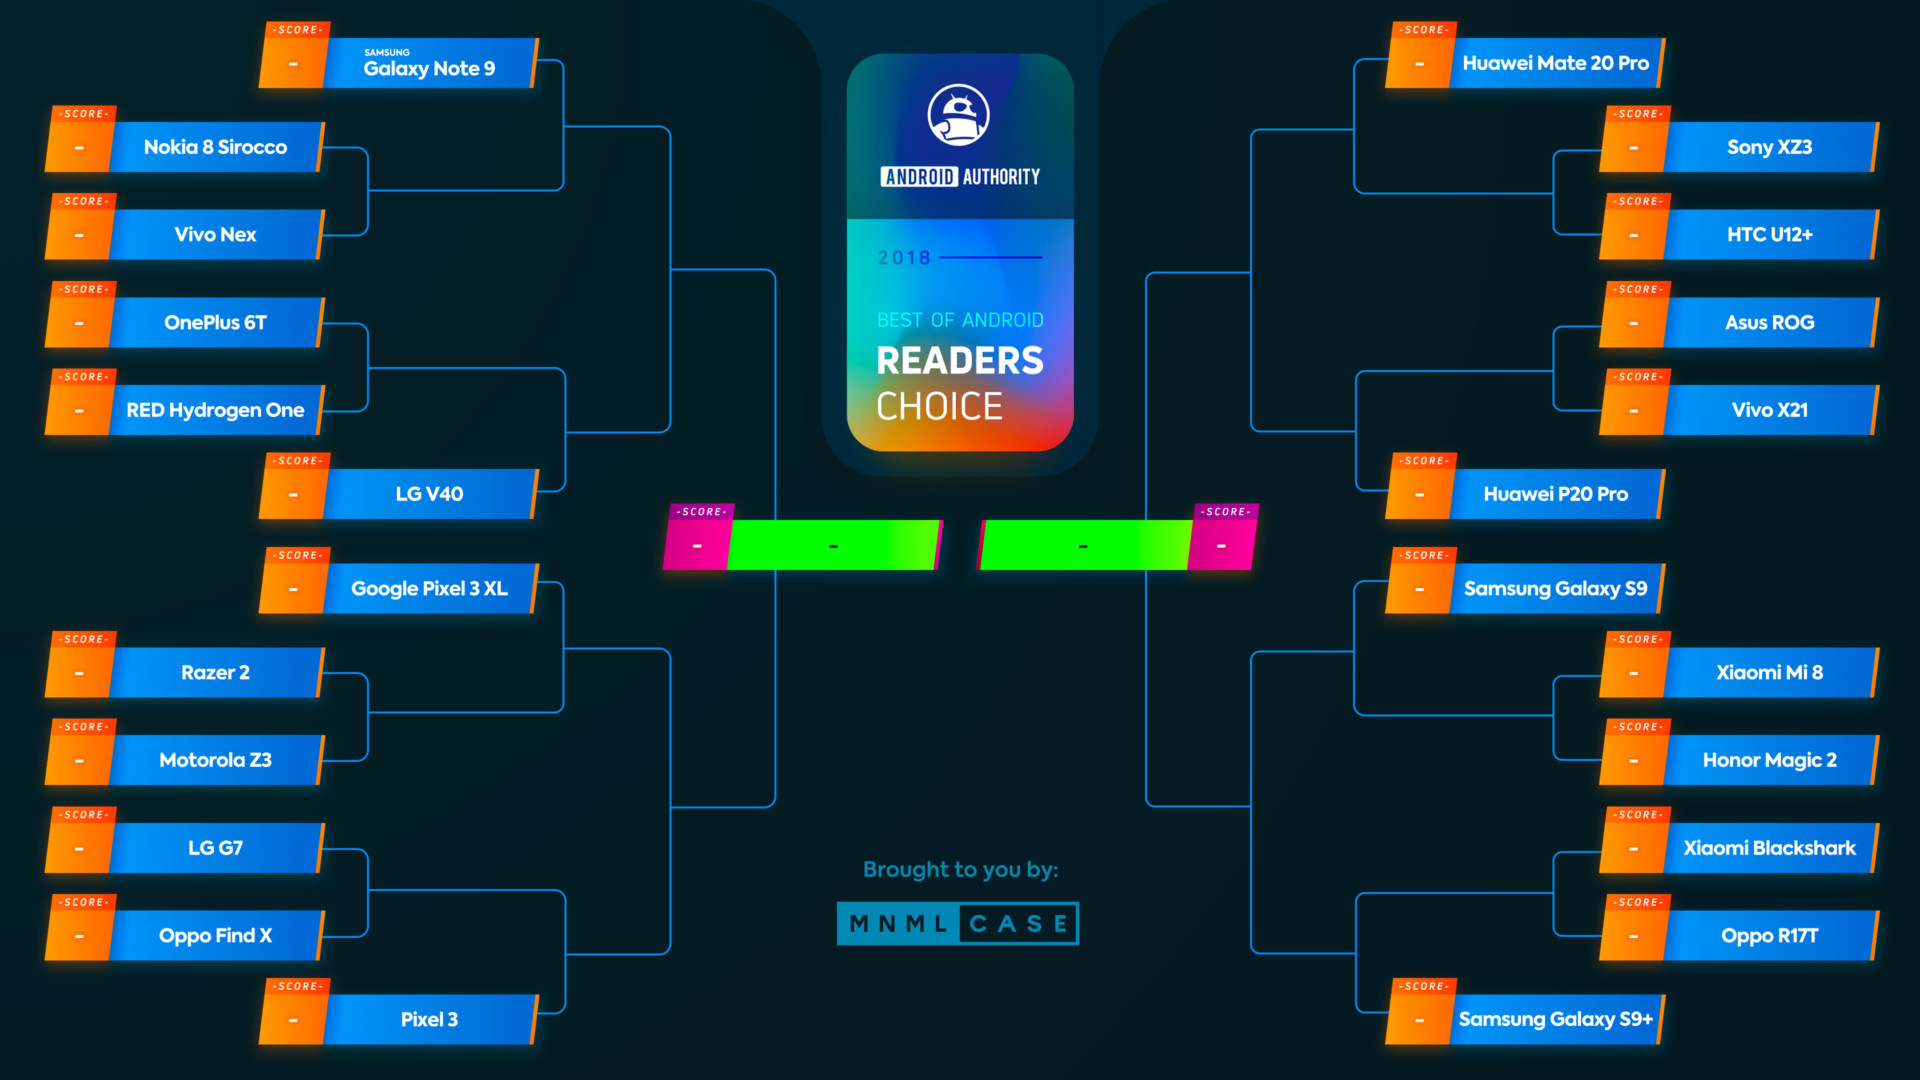 A graphic showing the bracket competition for Android Authority's Reader's Choice award.